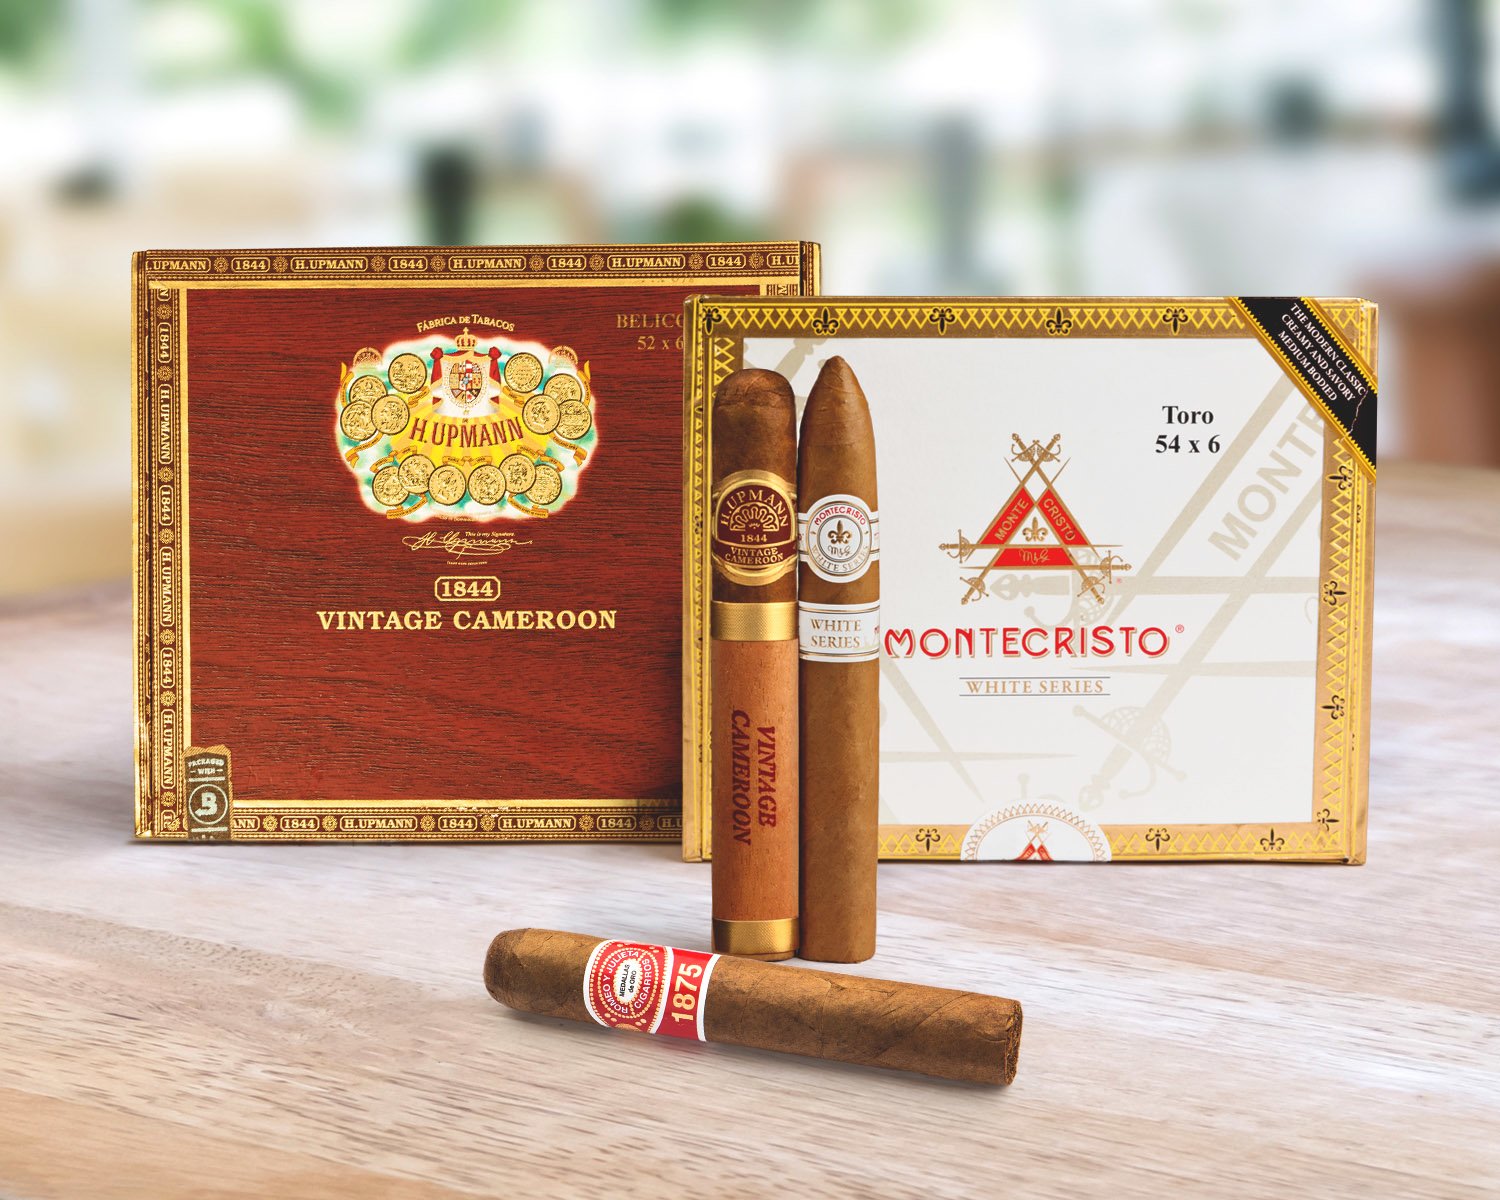 image of two boxes of cigars and three single cigars